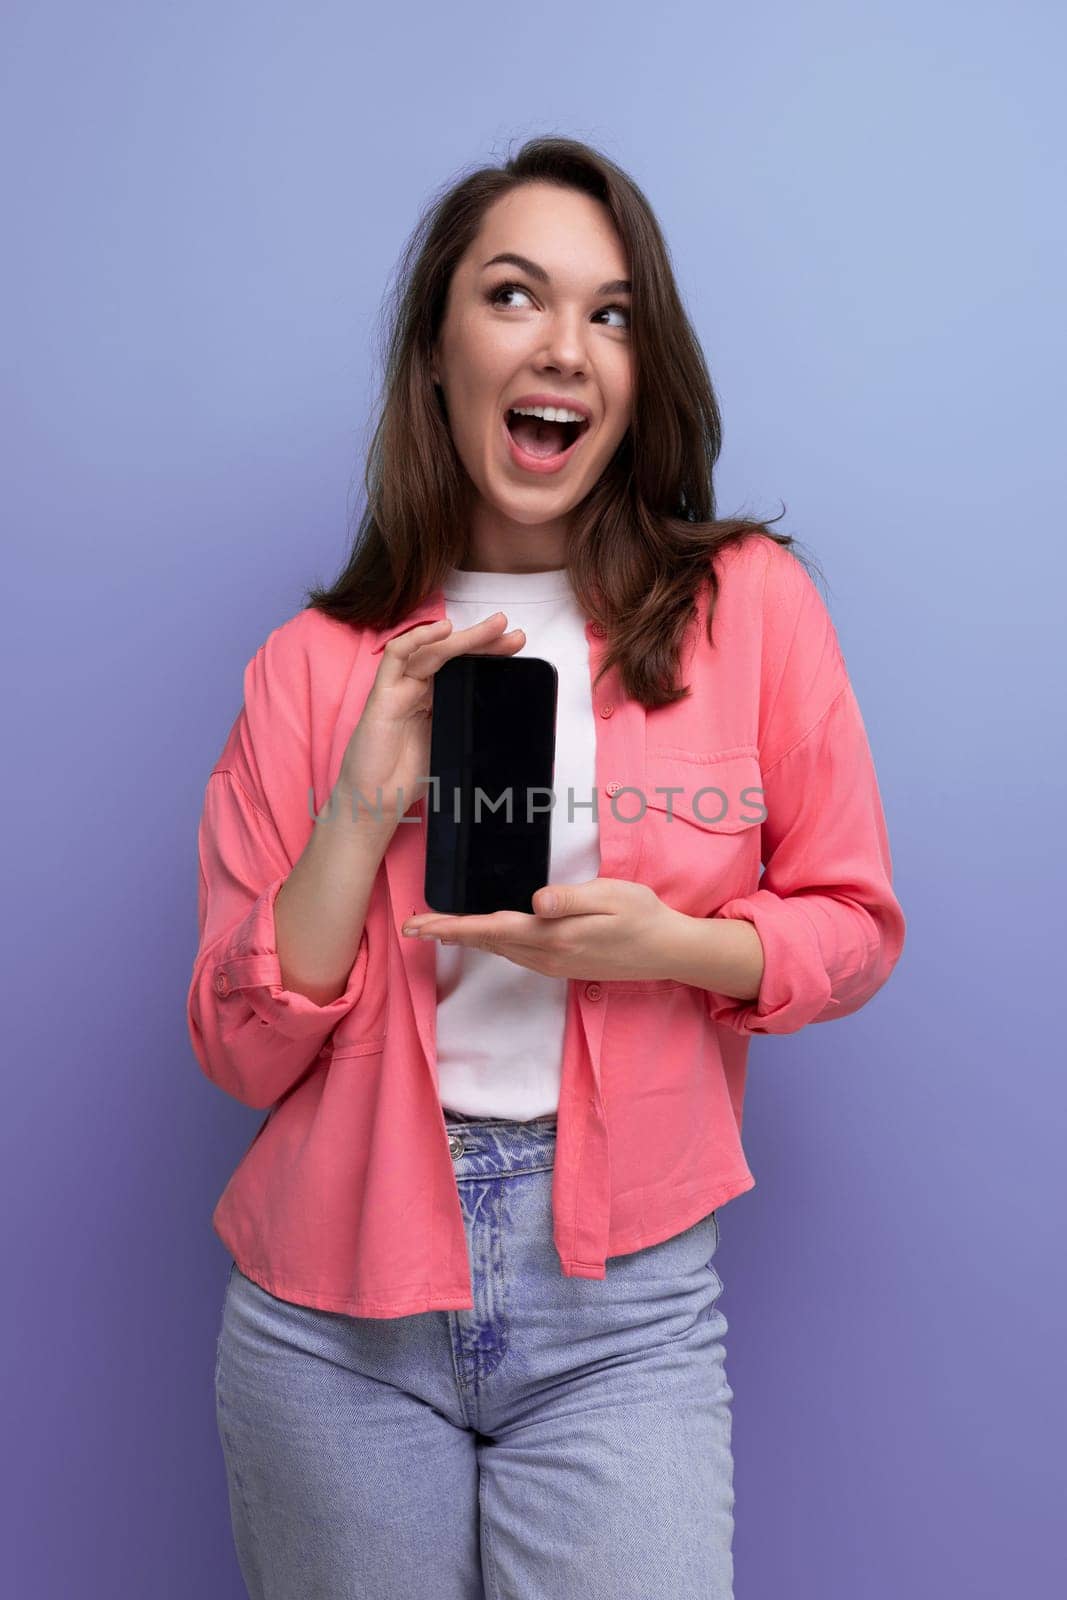 a cute brunette lady with dark hair below her shoulders in a shirt and jeans demonstrates a smartphone screen forward.